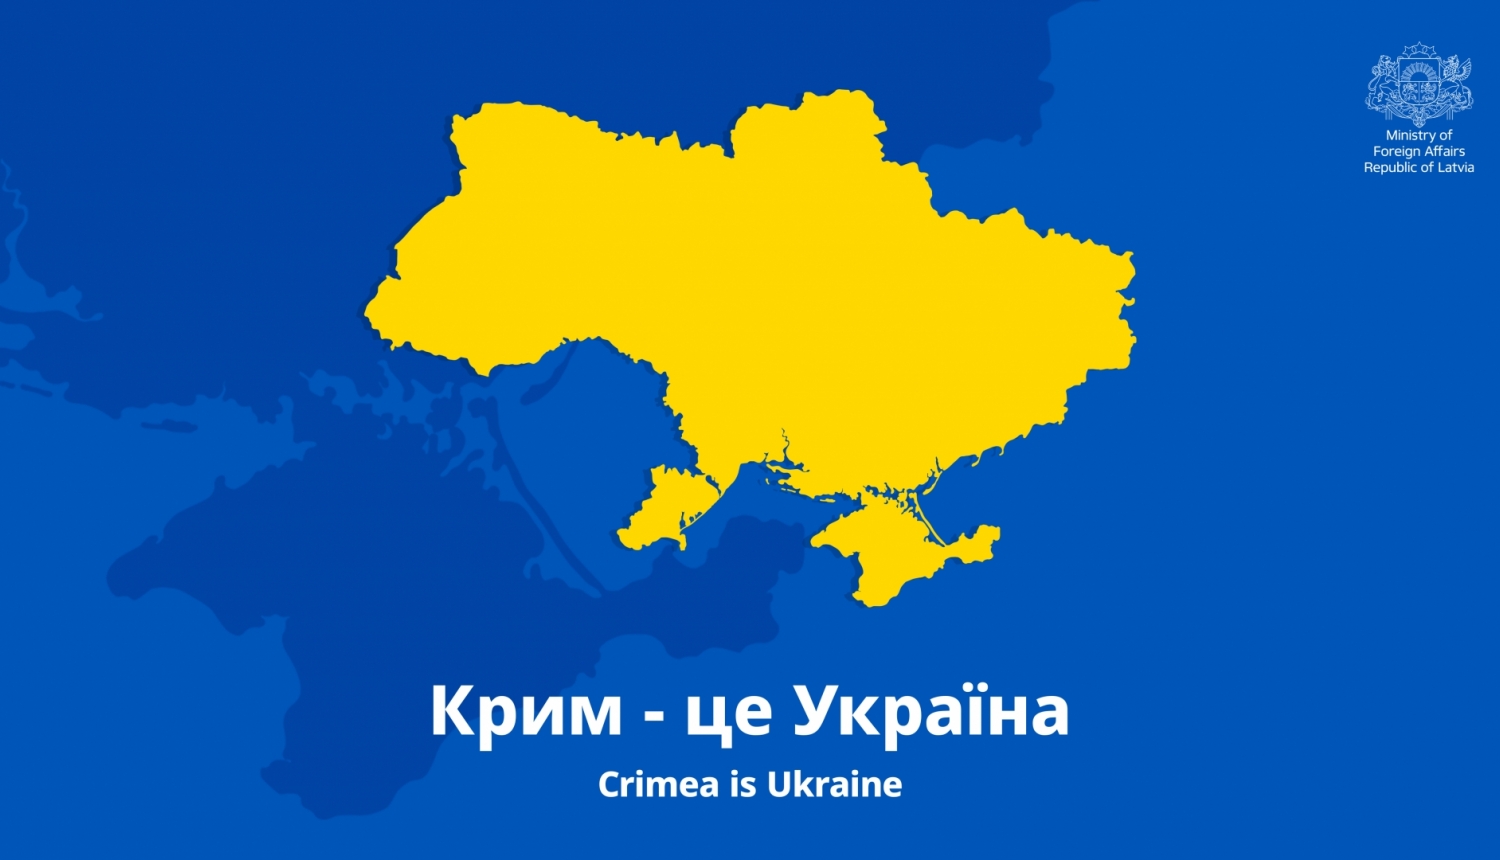 Ten years since the illegitimate referendum held by Russia in Crimea